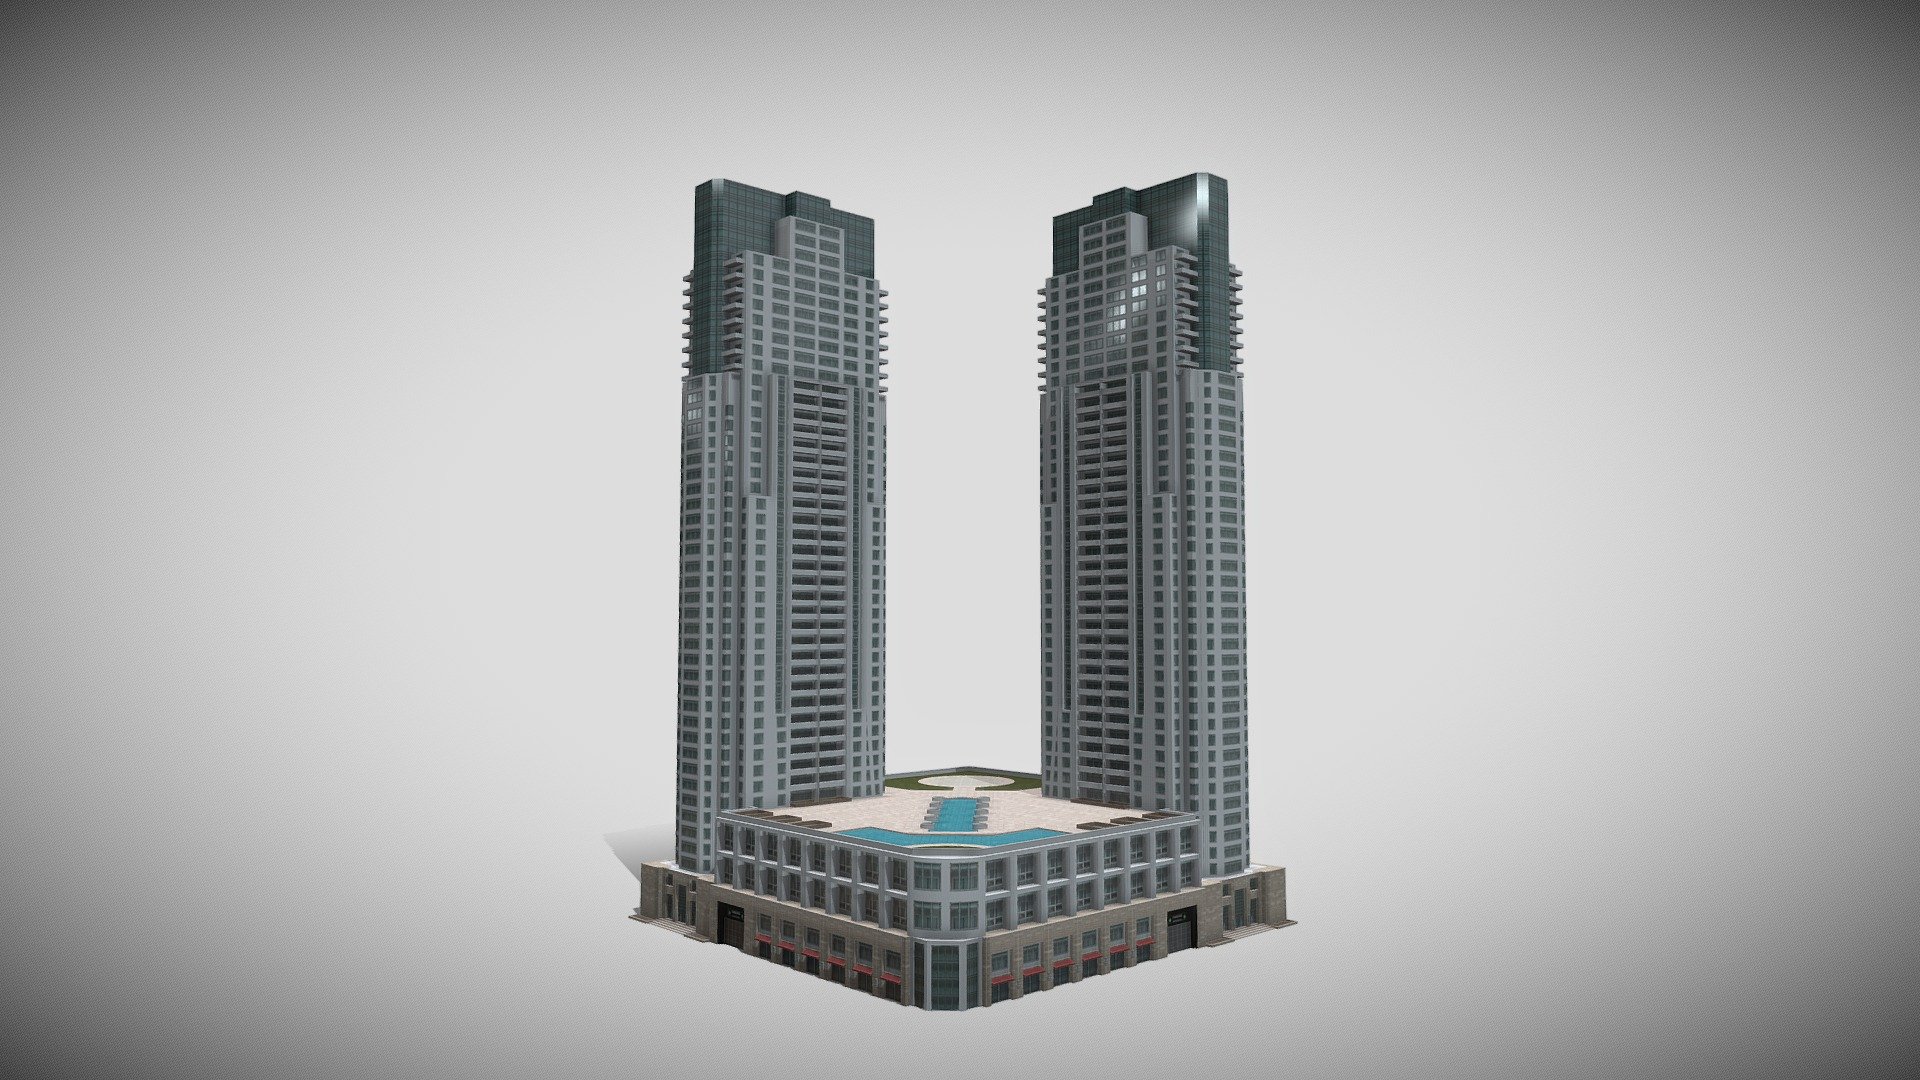 Model released for Cities Skylines: https://steamcommunity.com/sharedfiles/filedetails/?id=2072401066 - The Vizcayne, Miami - Download Free 3D model by aitortilla01 3d model